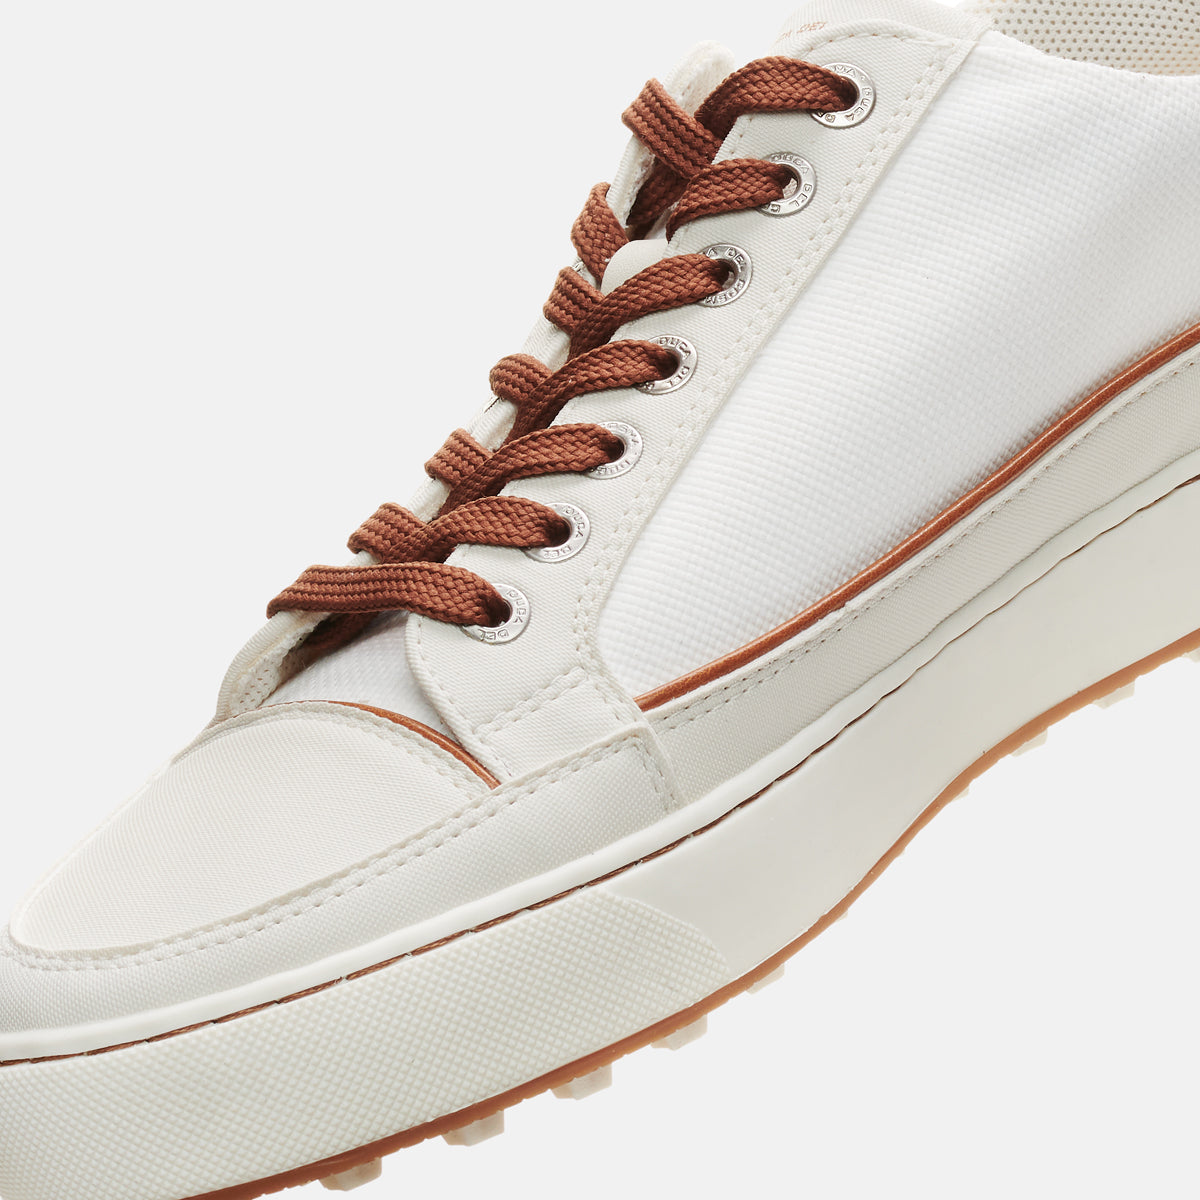 Laguna men's golf shoe white is the best golf shoe for on and off the golf course